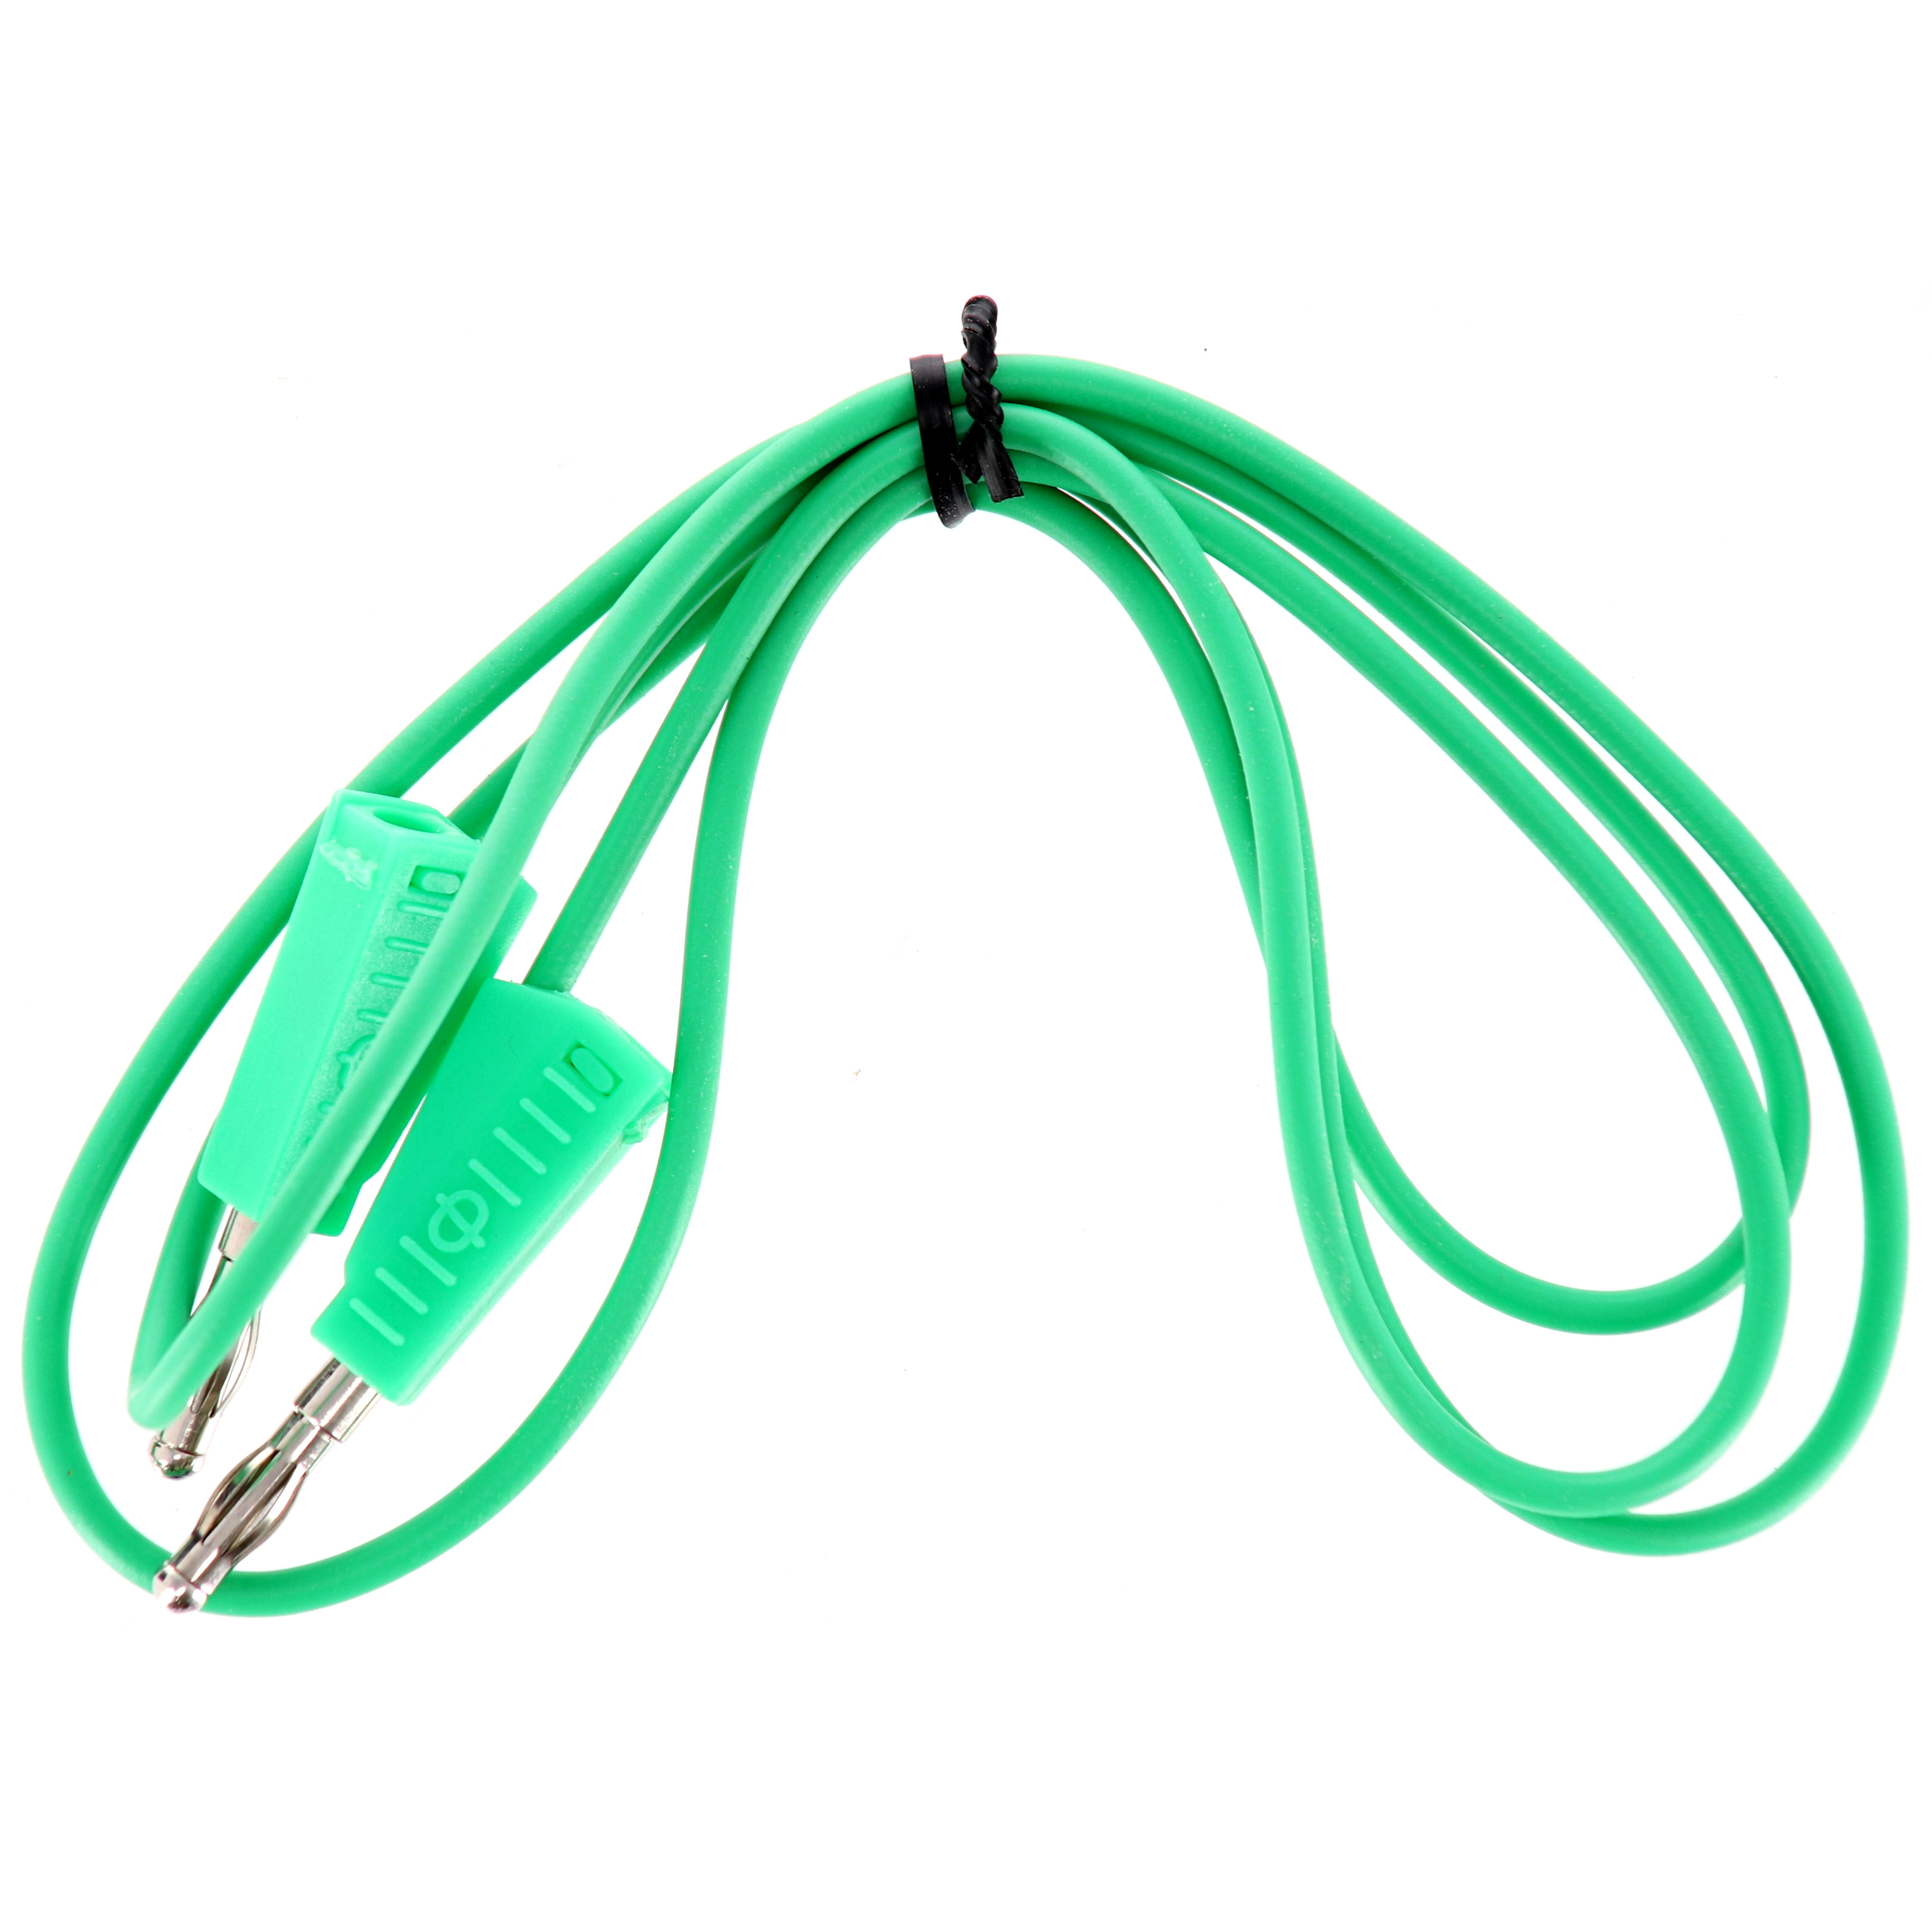 4mm Stackable Plug Lead 1000mm - Green